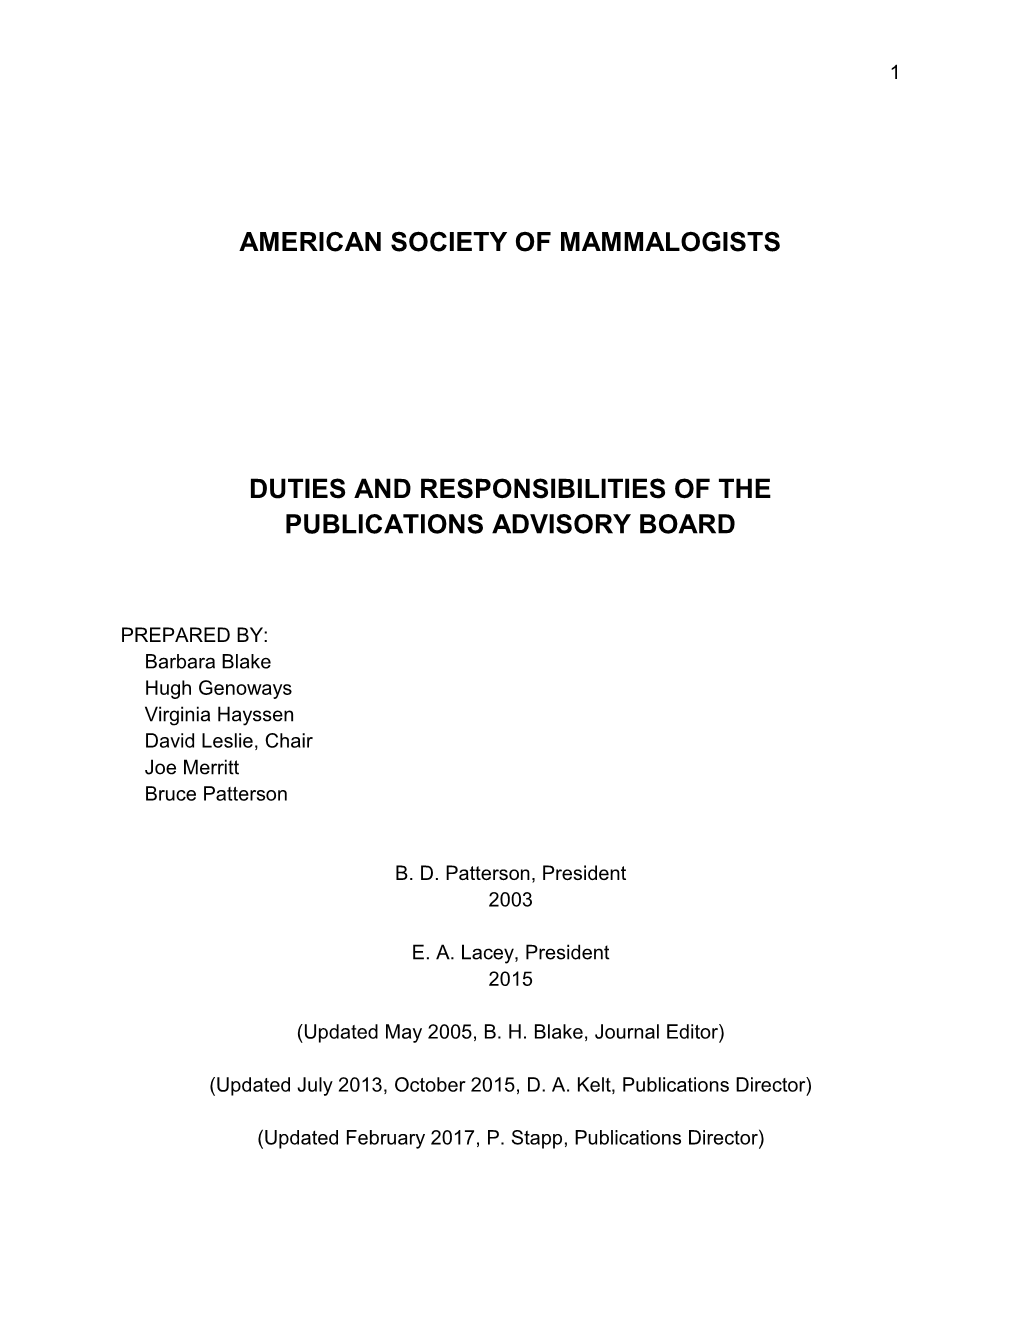 American Society of Mammalogists Duties and Responsibilities of the Publications Advisory Board